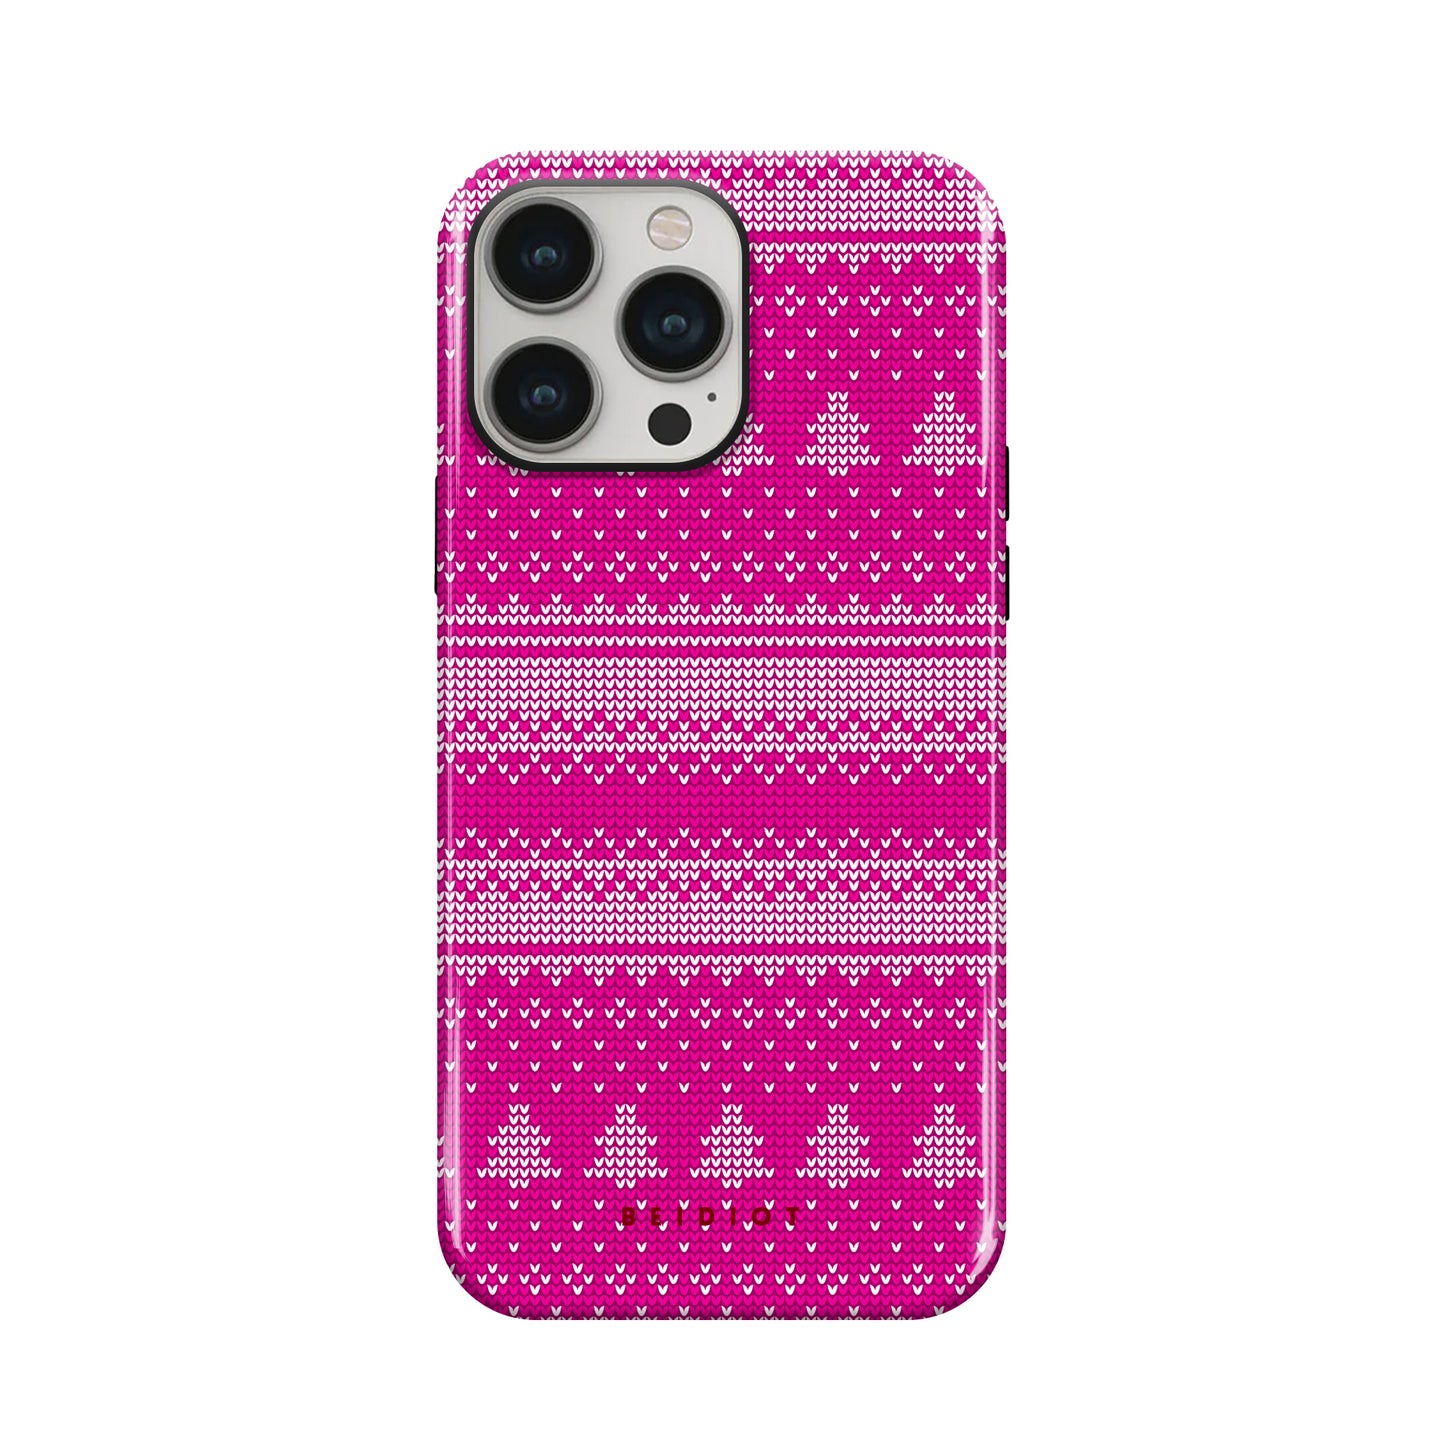 Yule Threads iPhone Case